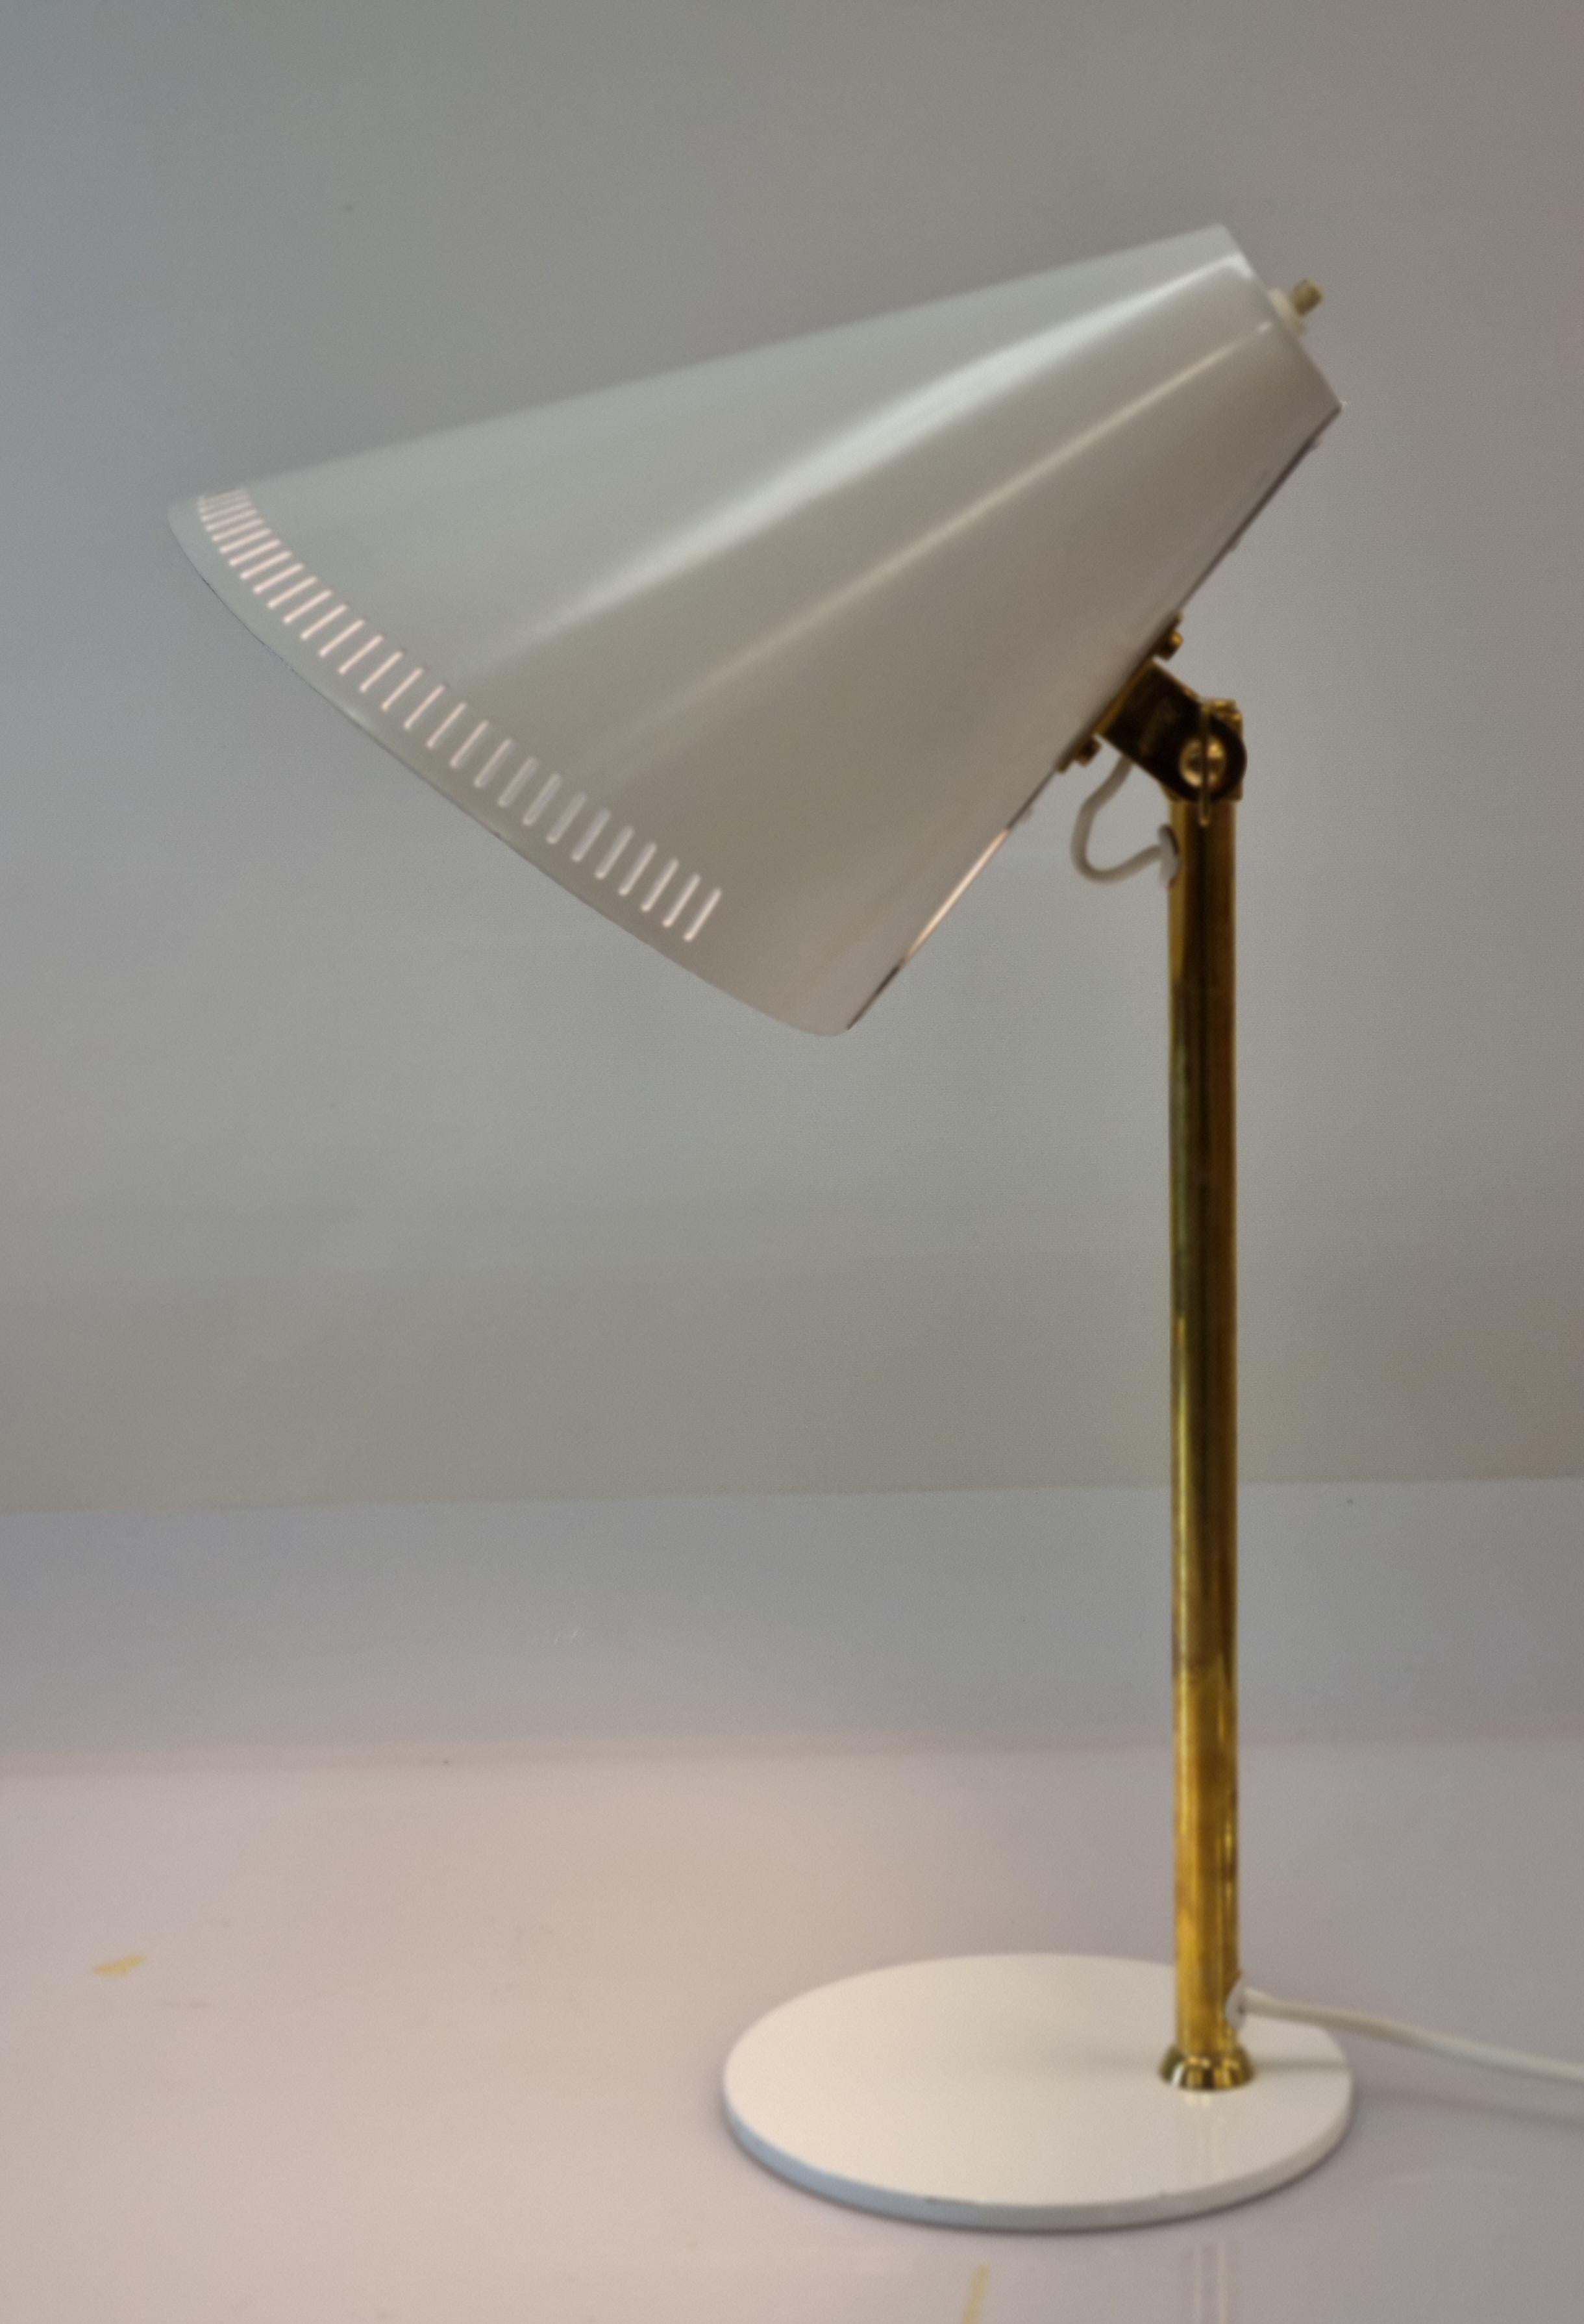 This table lamp model H5-7 by Paavo Tynell is a time lasting and practical model starting from materials. In this model firm brass stem supports aluminum cone shade. The shade is matt white and is adjustable for your needs. The light switch is on